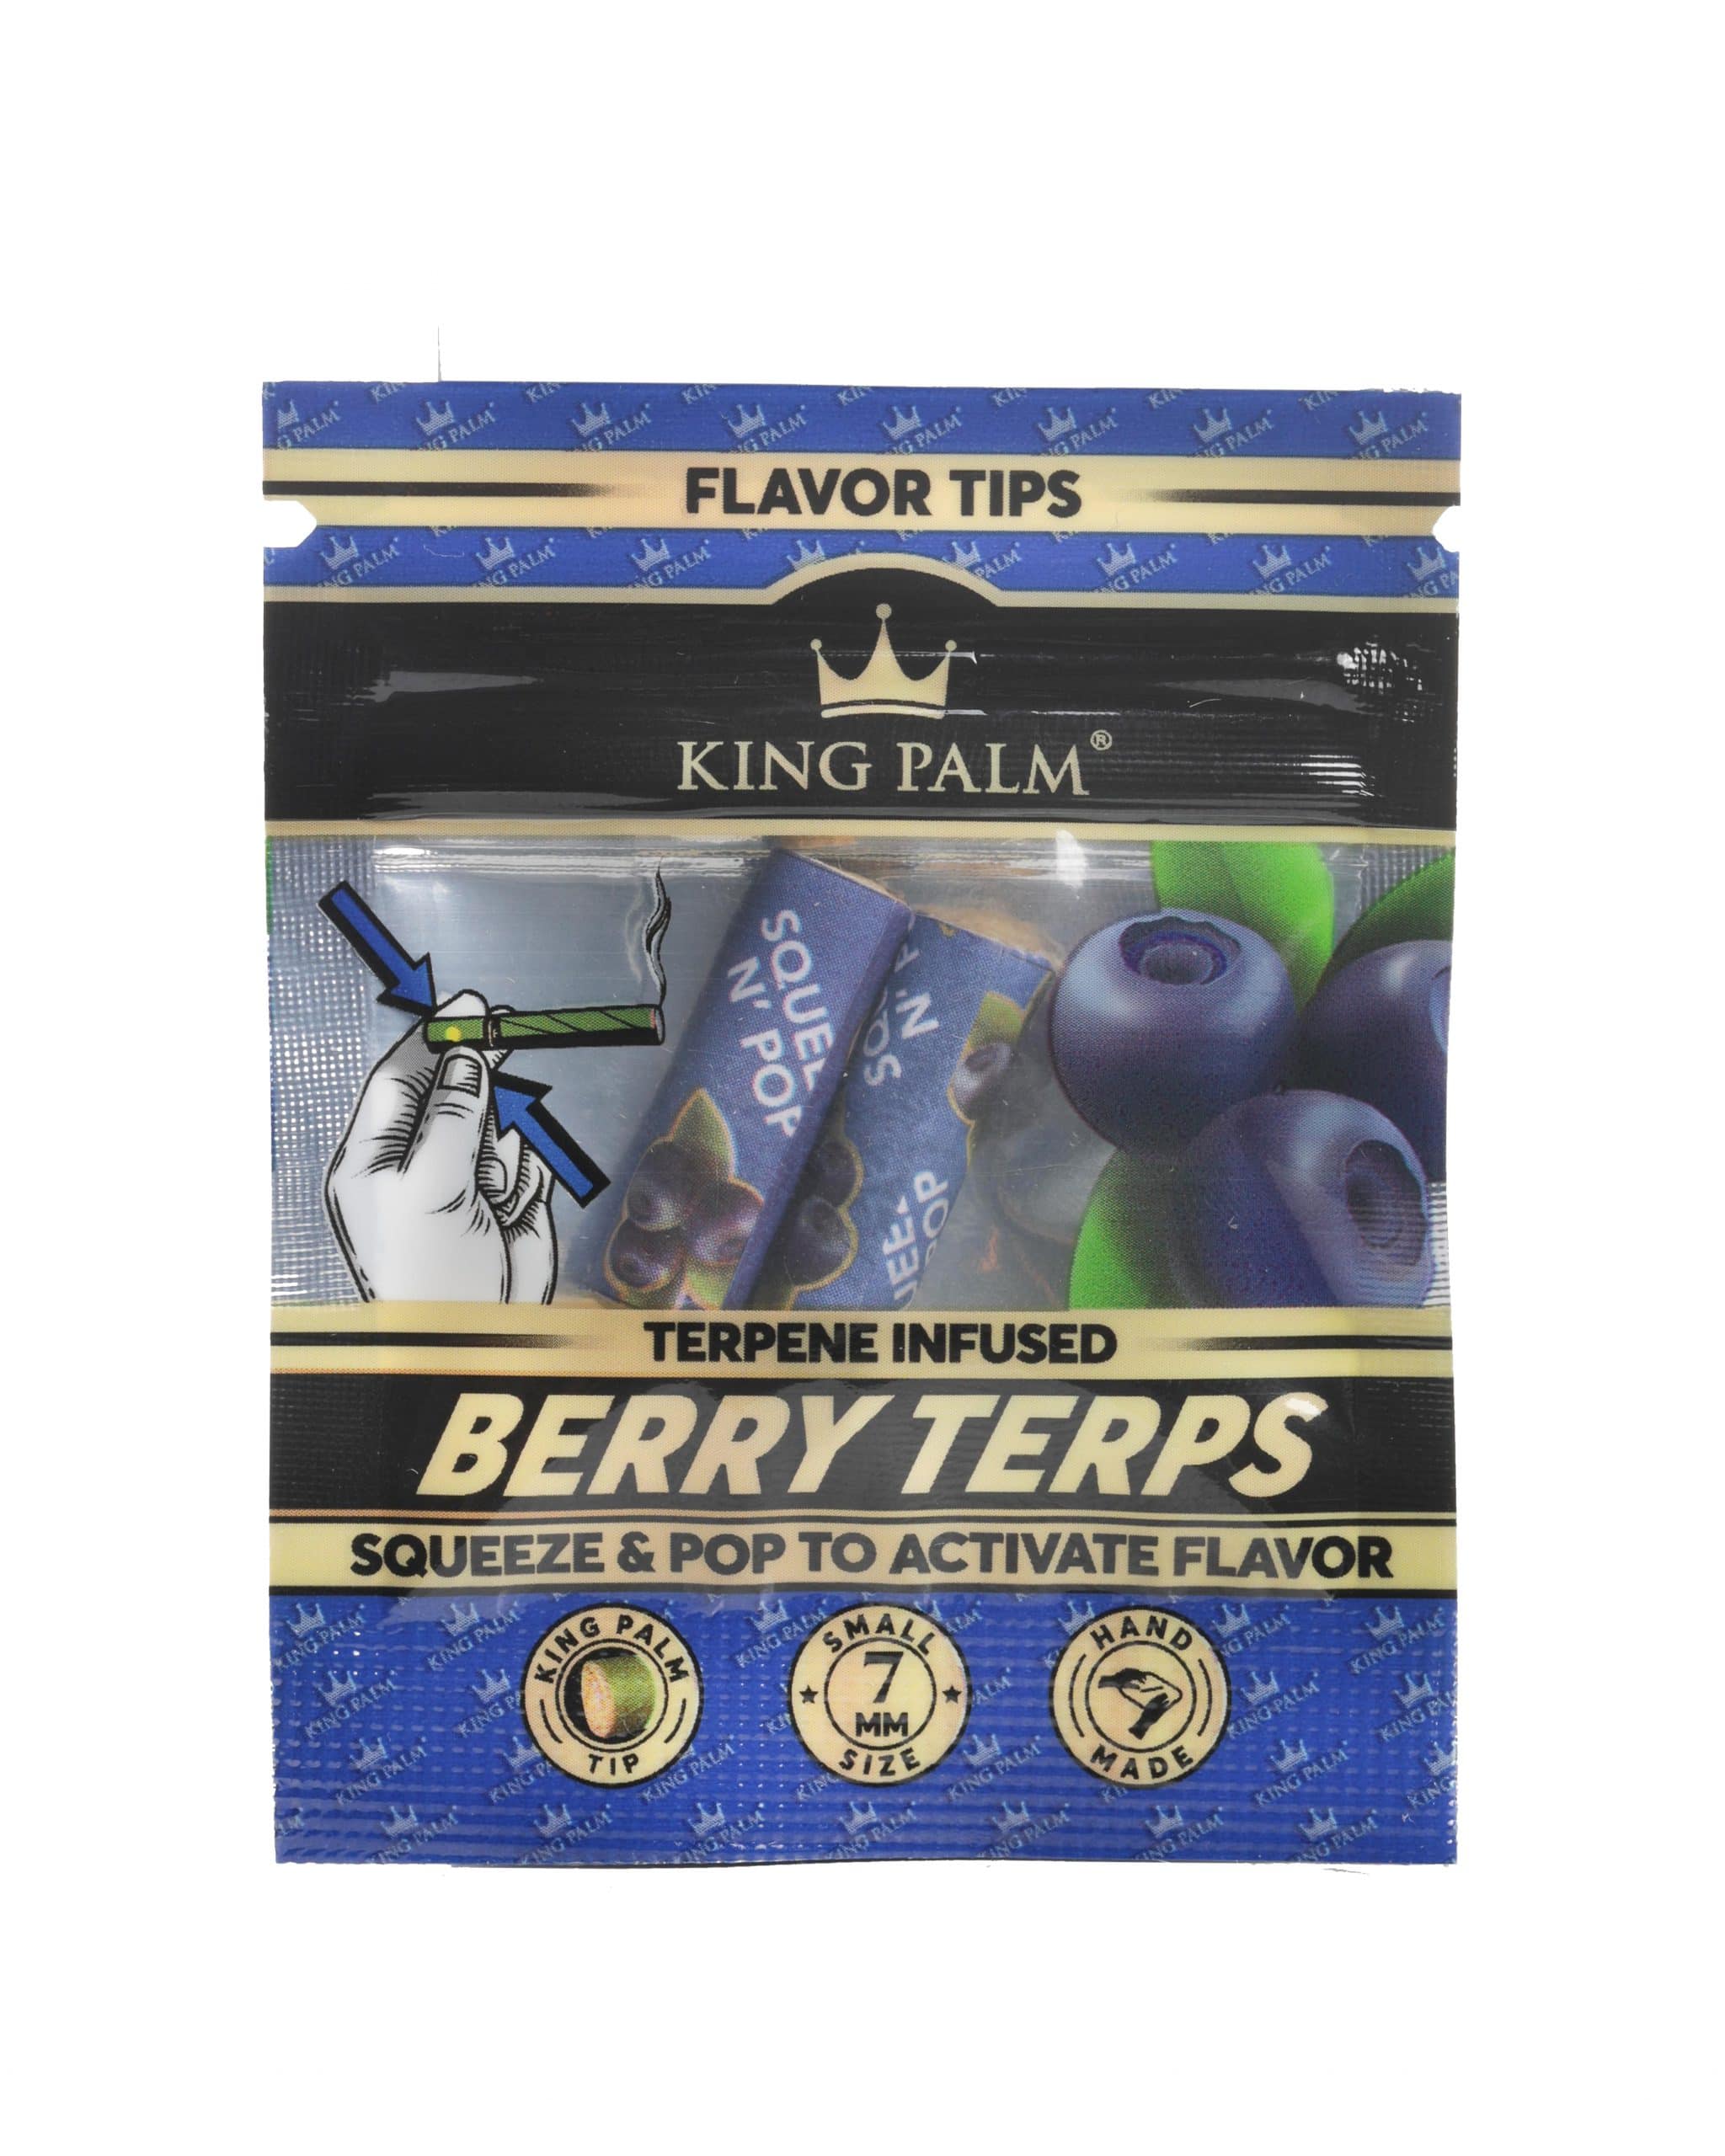 king palm flavor tips berry terps